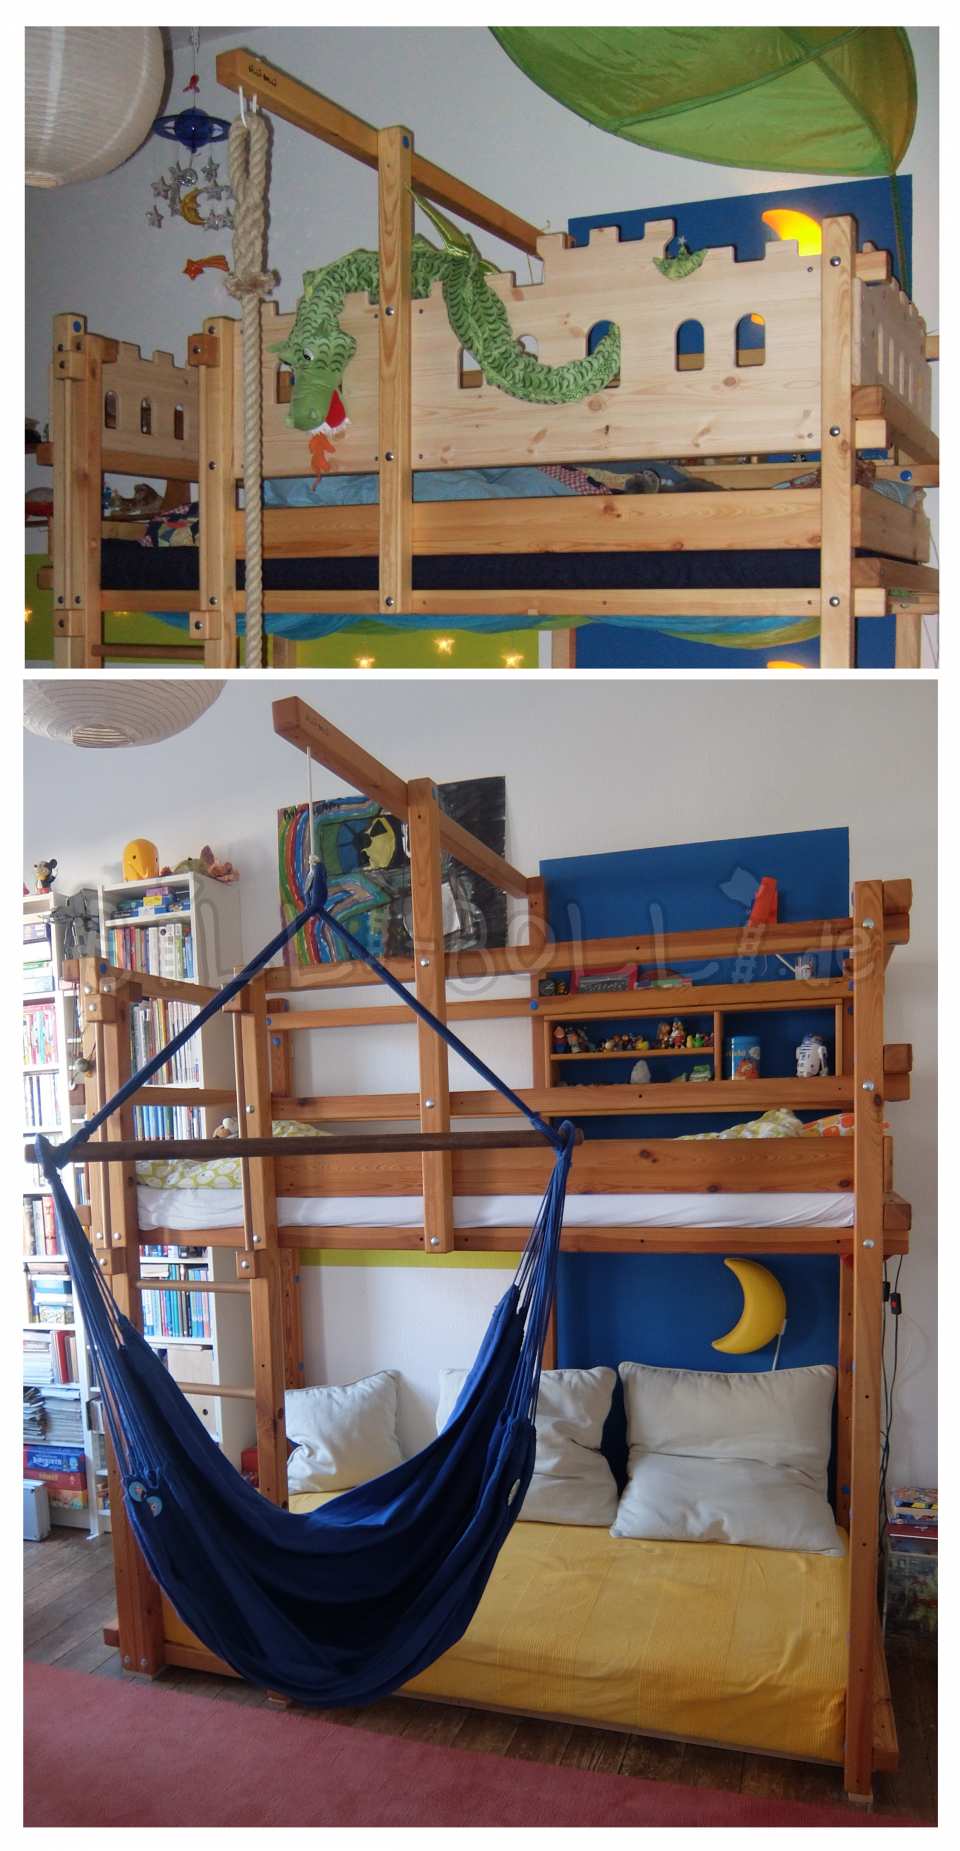 Growing loft bed, 90 x 200 cm, oiled-waxed pine (Category: second hand loft bed)